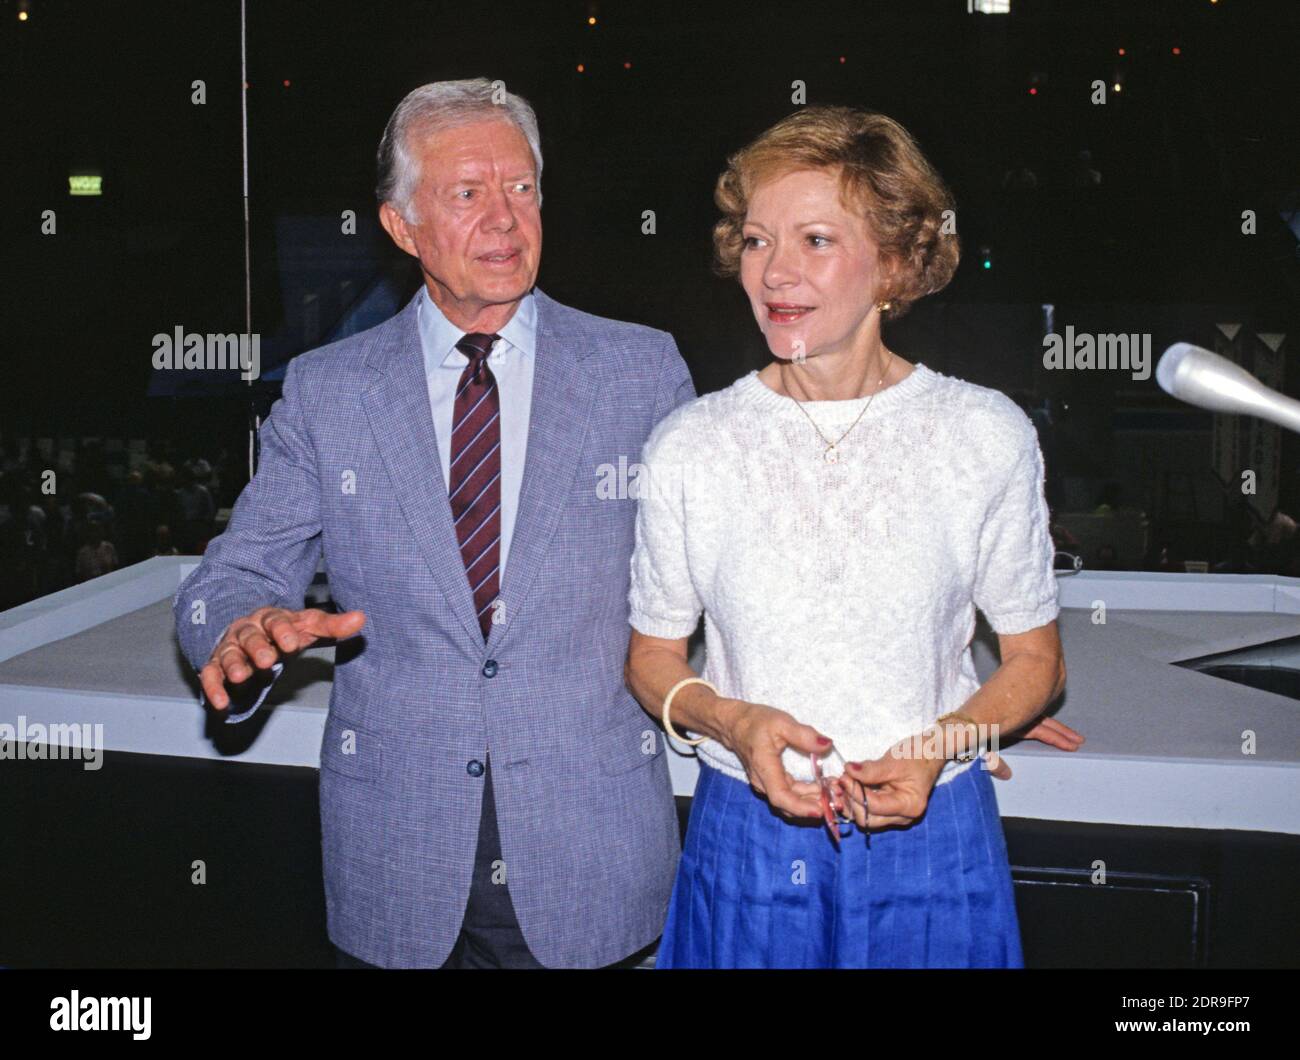 Former United States President Jimmy Carter, accompanied by his wife, former first lady Rosalynn Carter, visits the Omni Coliseum in Atlanta, Georgia prior to his addressing the 1988 Democratic National Convention on July 18, 1988. Photo by Arnie Sachs/CNP/ABACAPRESS.COM Stock Photo